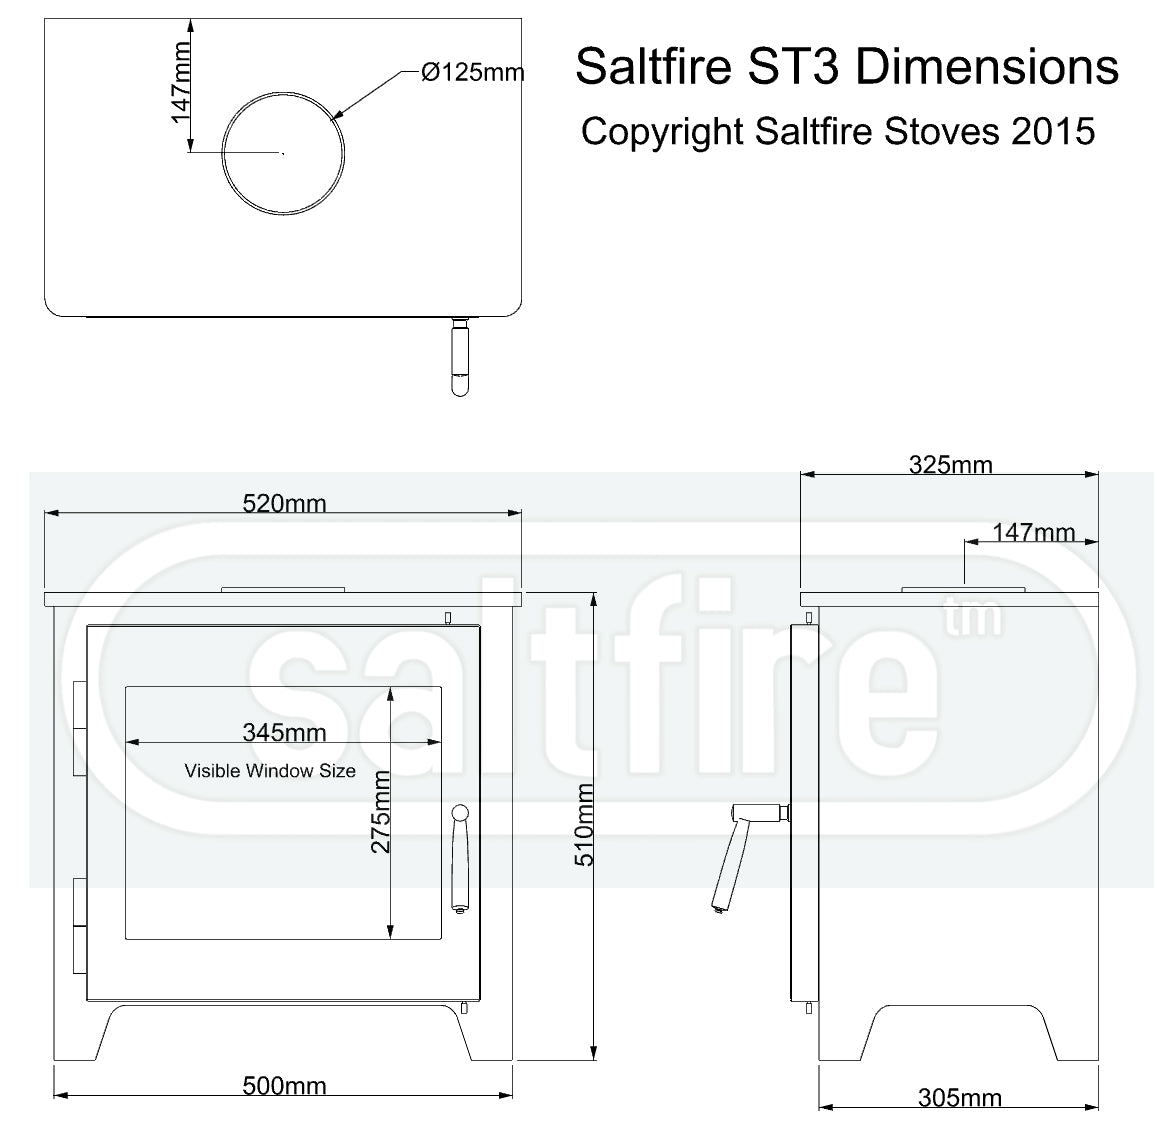 Dimensions and specifications for Saltfire ST3 wood burning stove